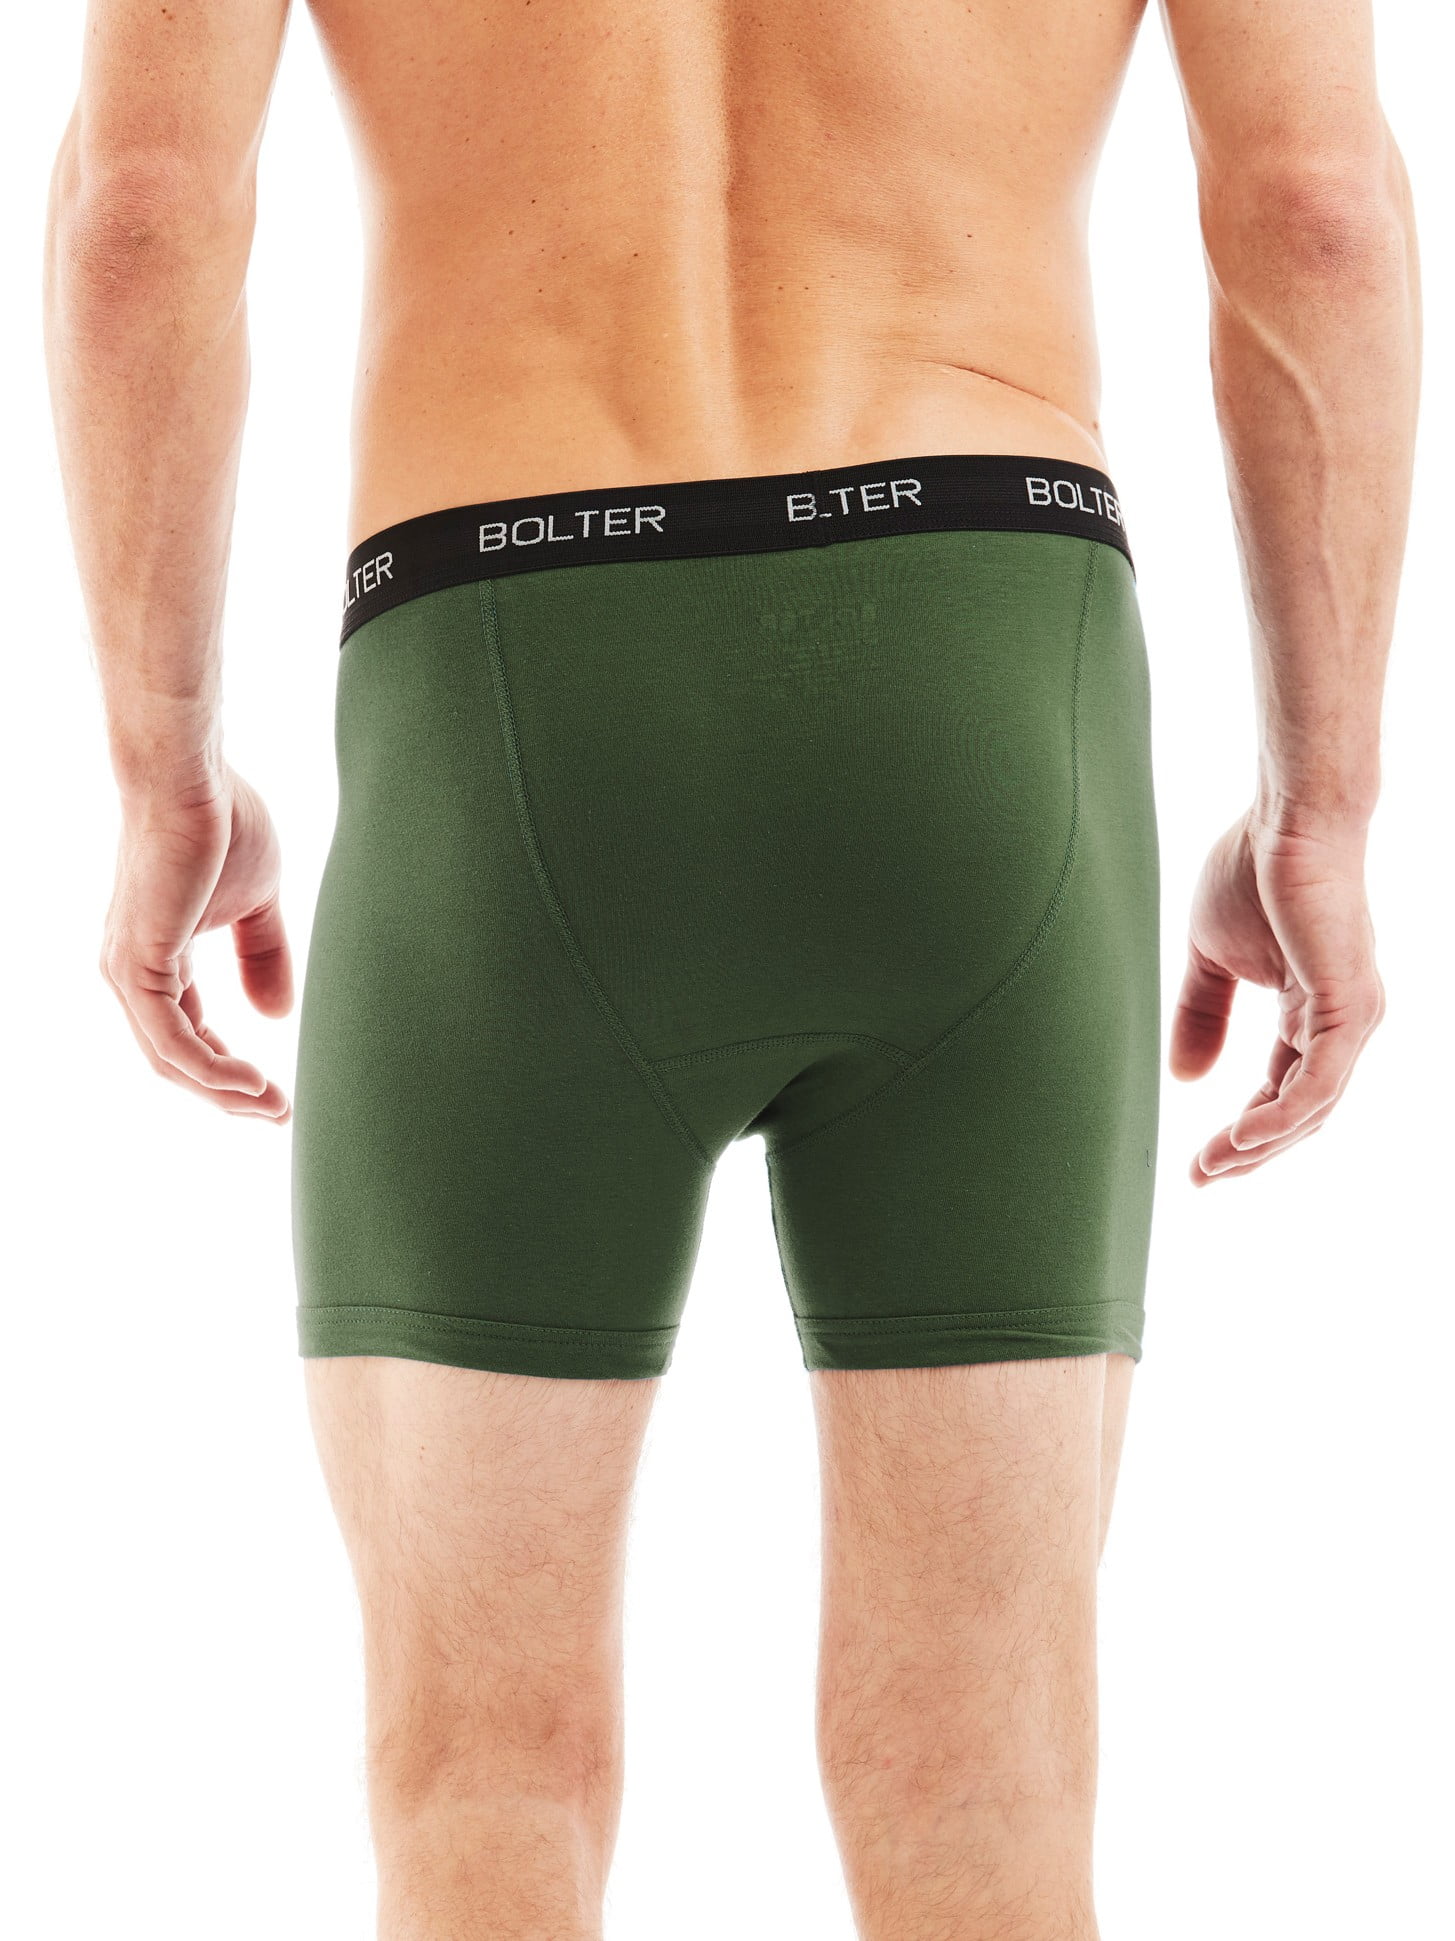 Bolter Men's Cotton Spandex All Day Boxer Briefs 5-Pack (Small